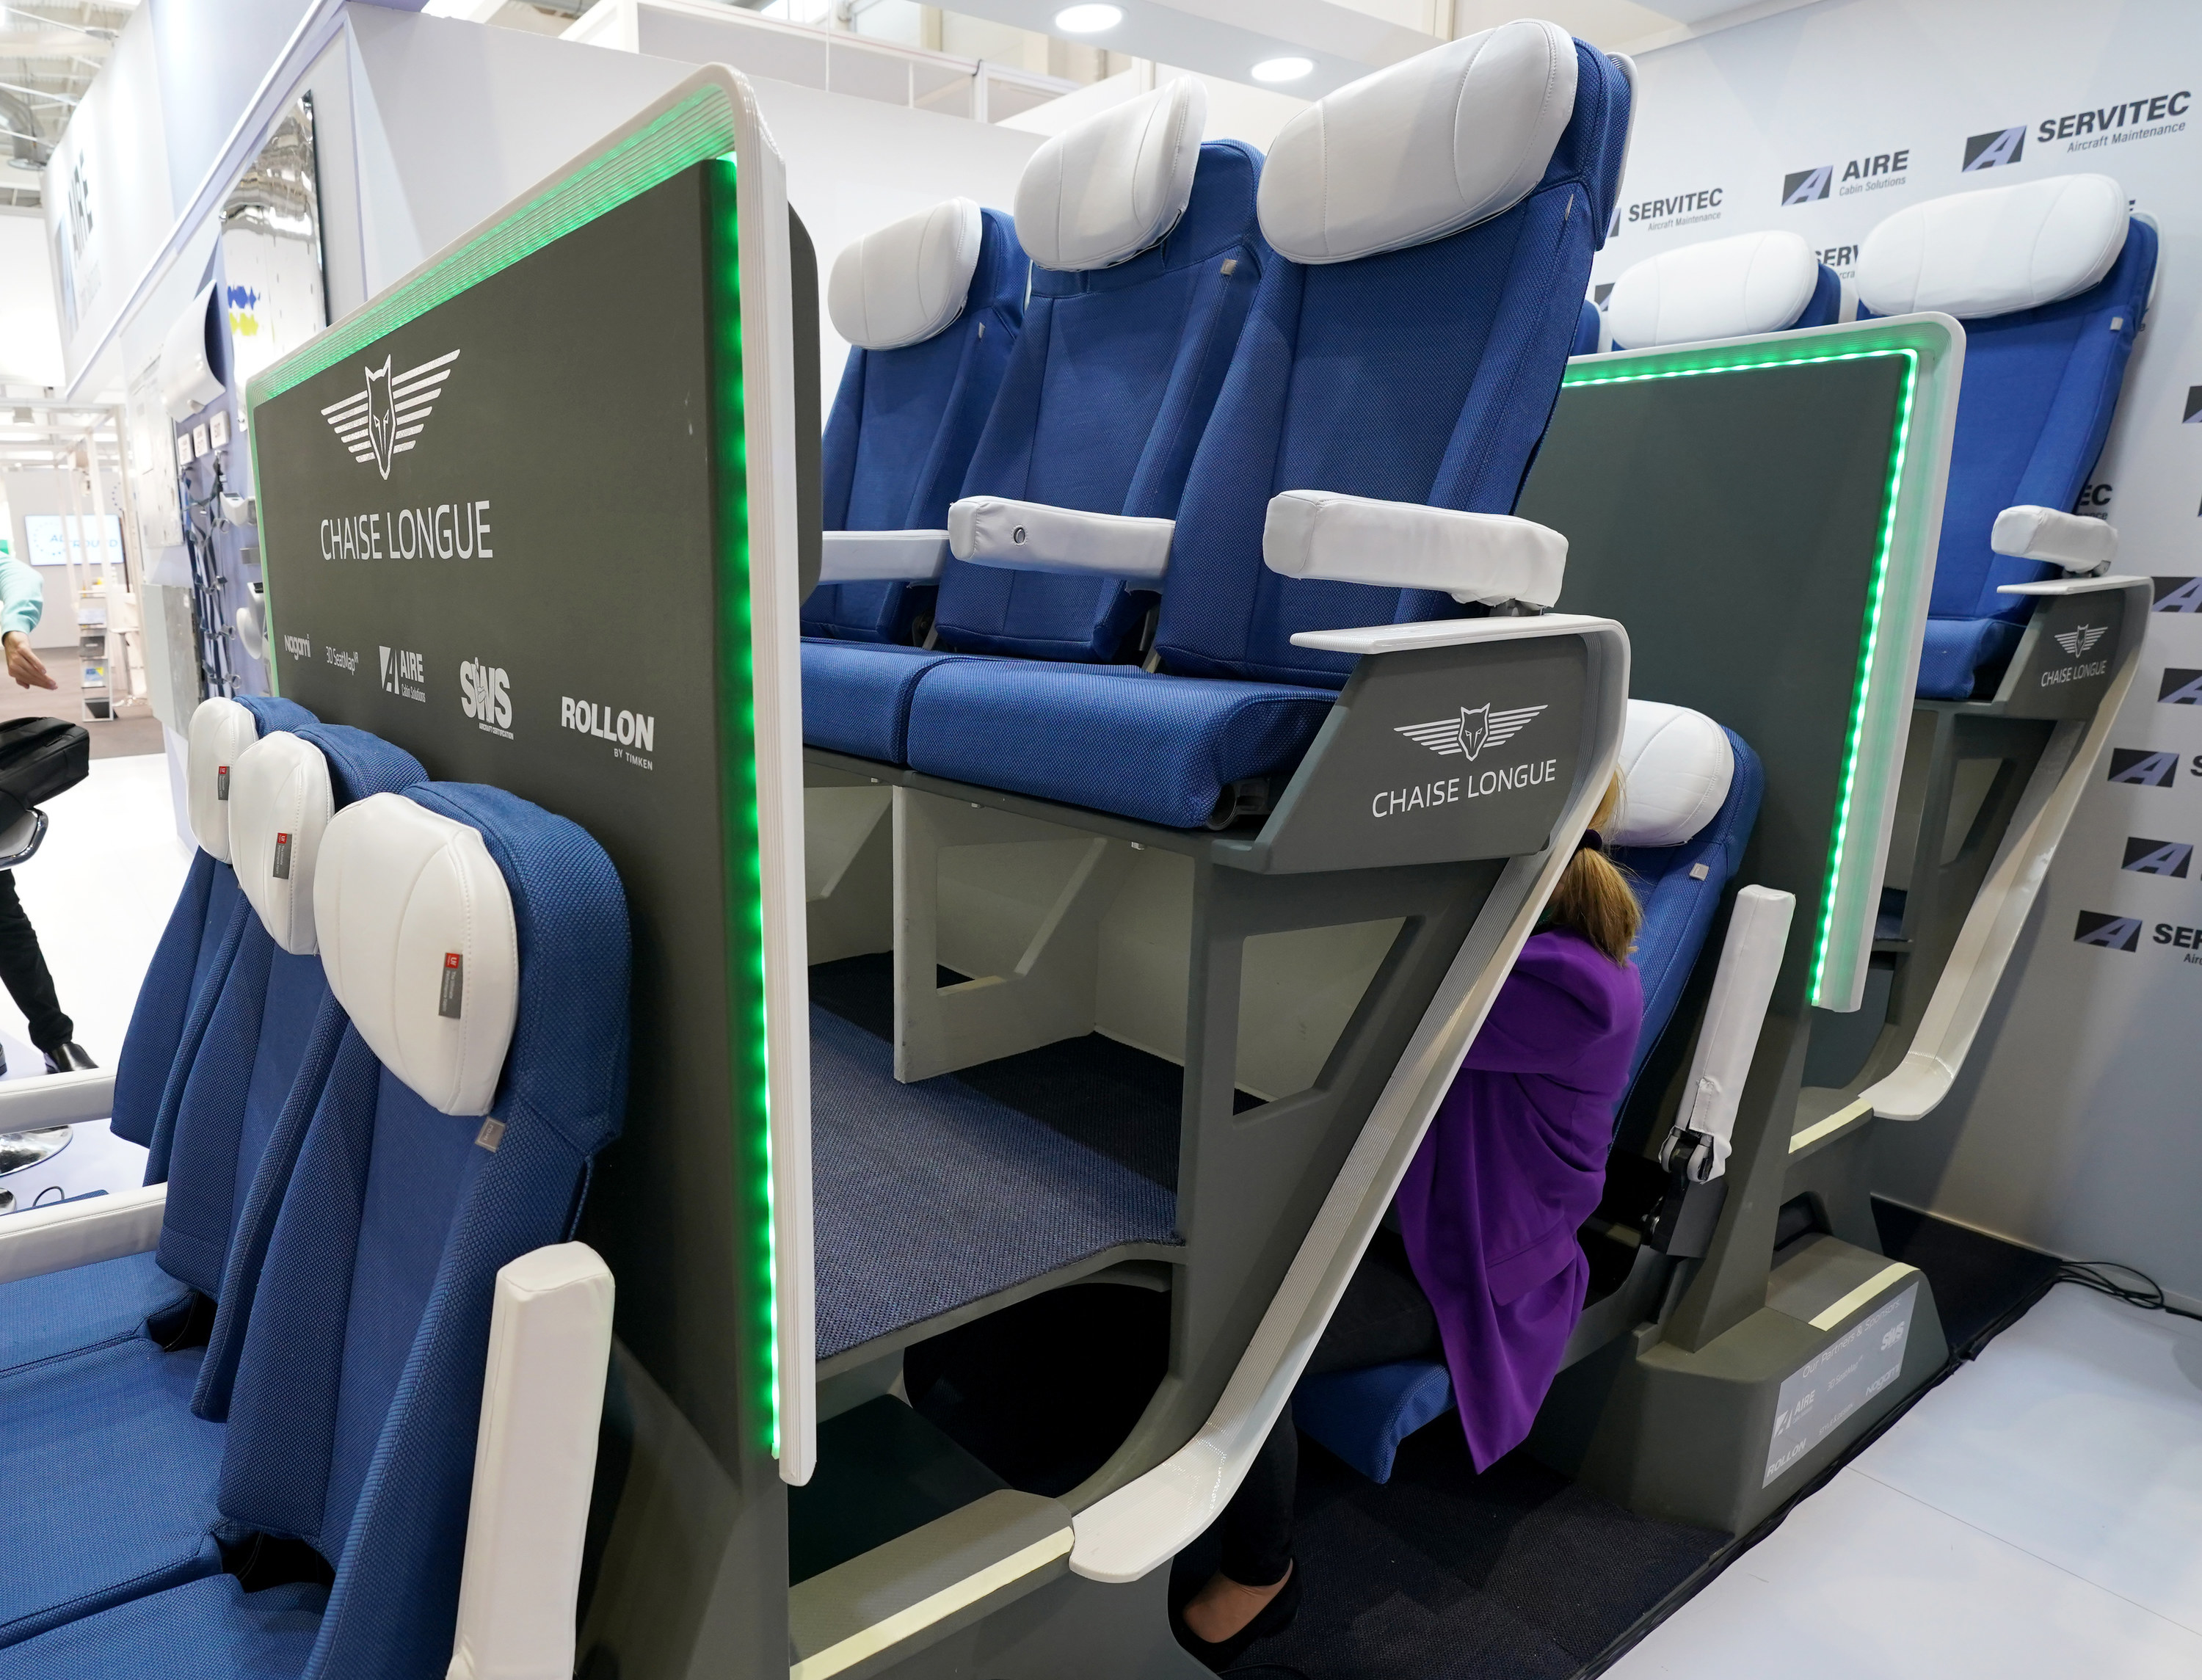 Why you'll never fly in an airplane with those double-decker seats